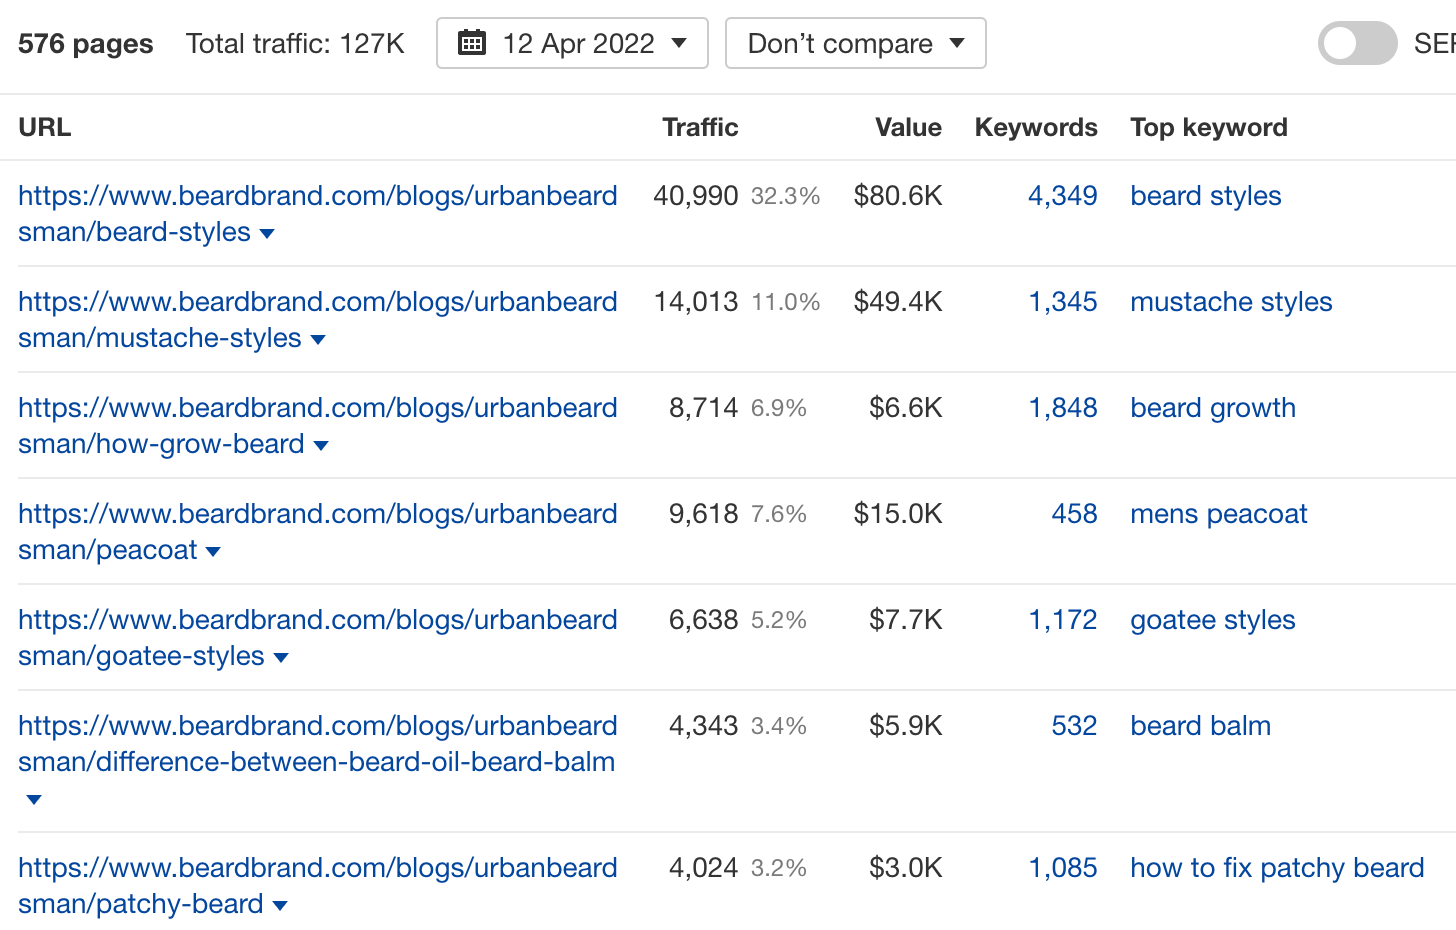 Pages sending the most traffic to Beardbrand, sorted by estimated monthly organic traffic in Ahrefs' Site Explorer.